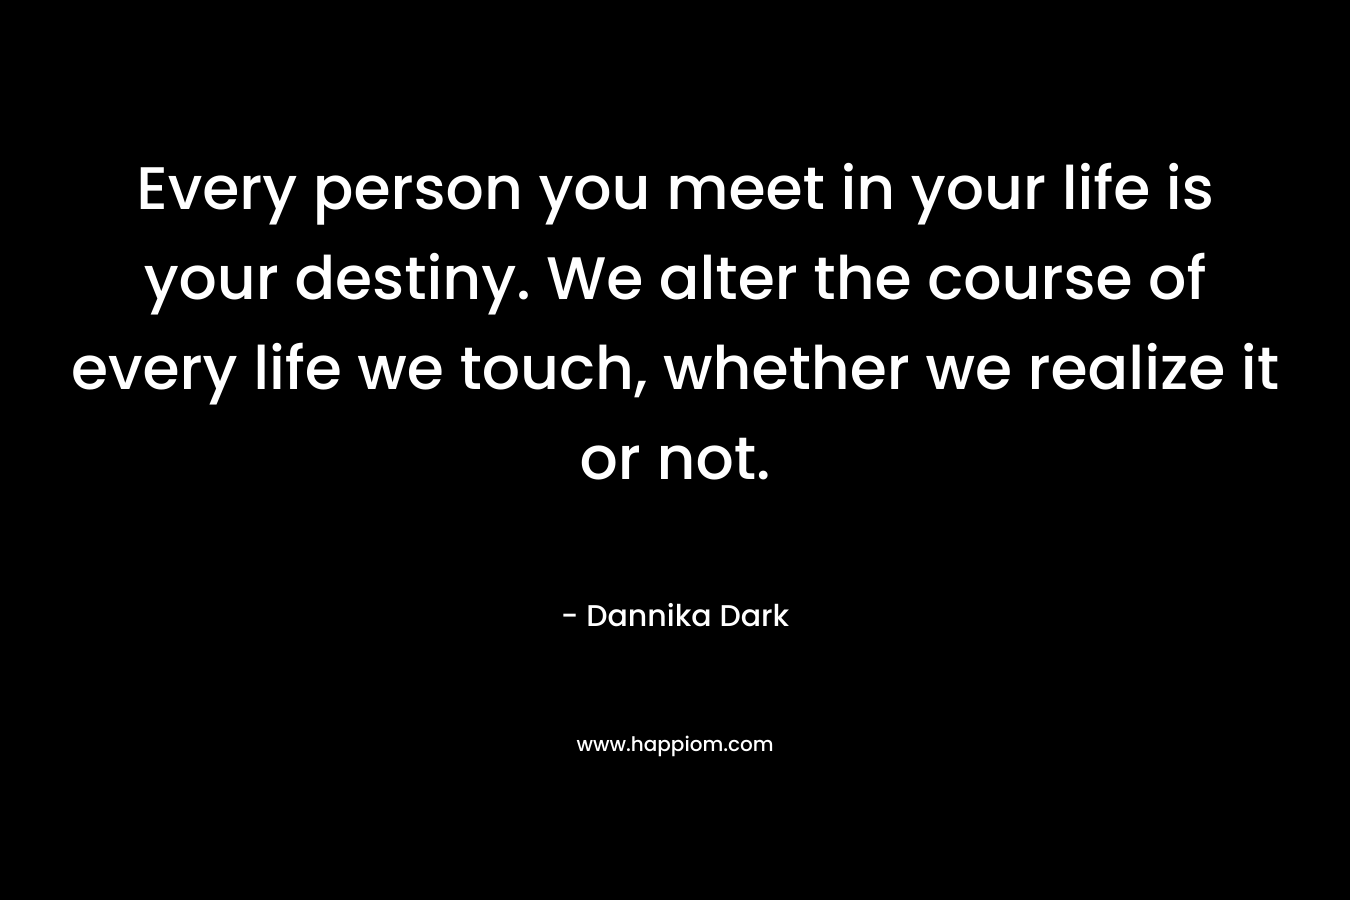 Every person you meet in your life is your destiny. We alter the course of every life we touch, whether we realize it or not.